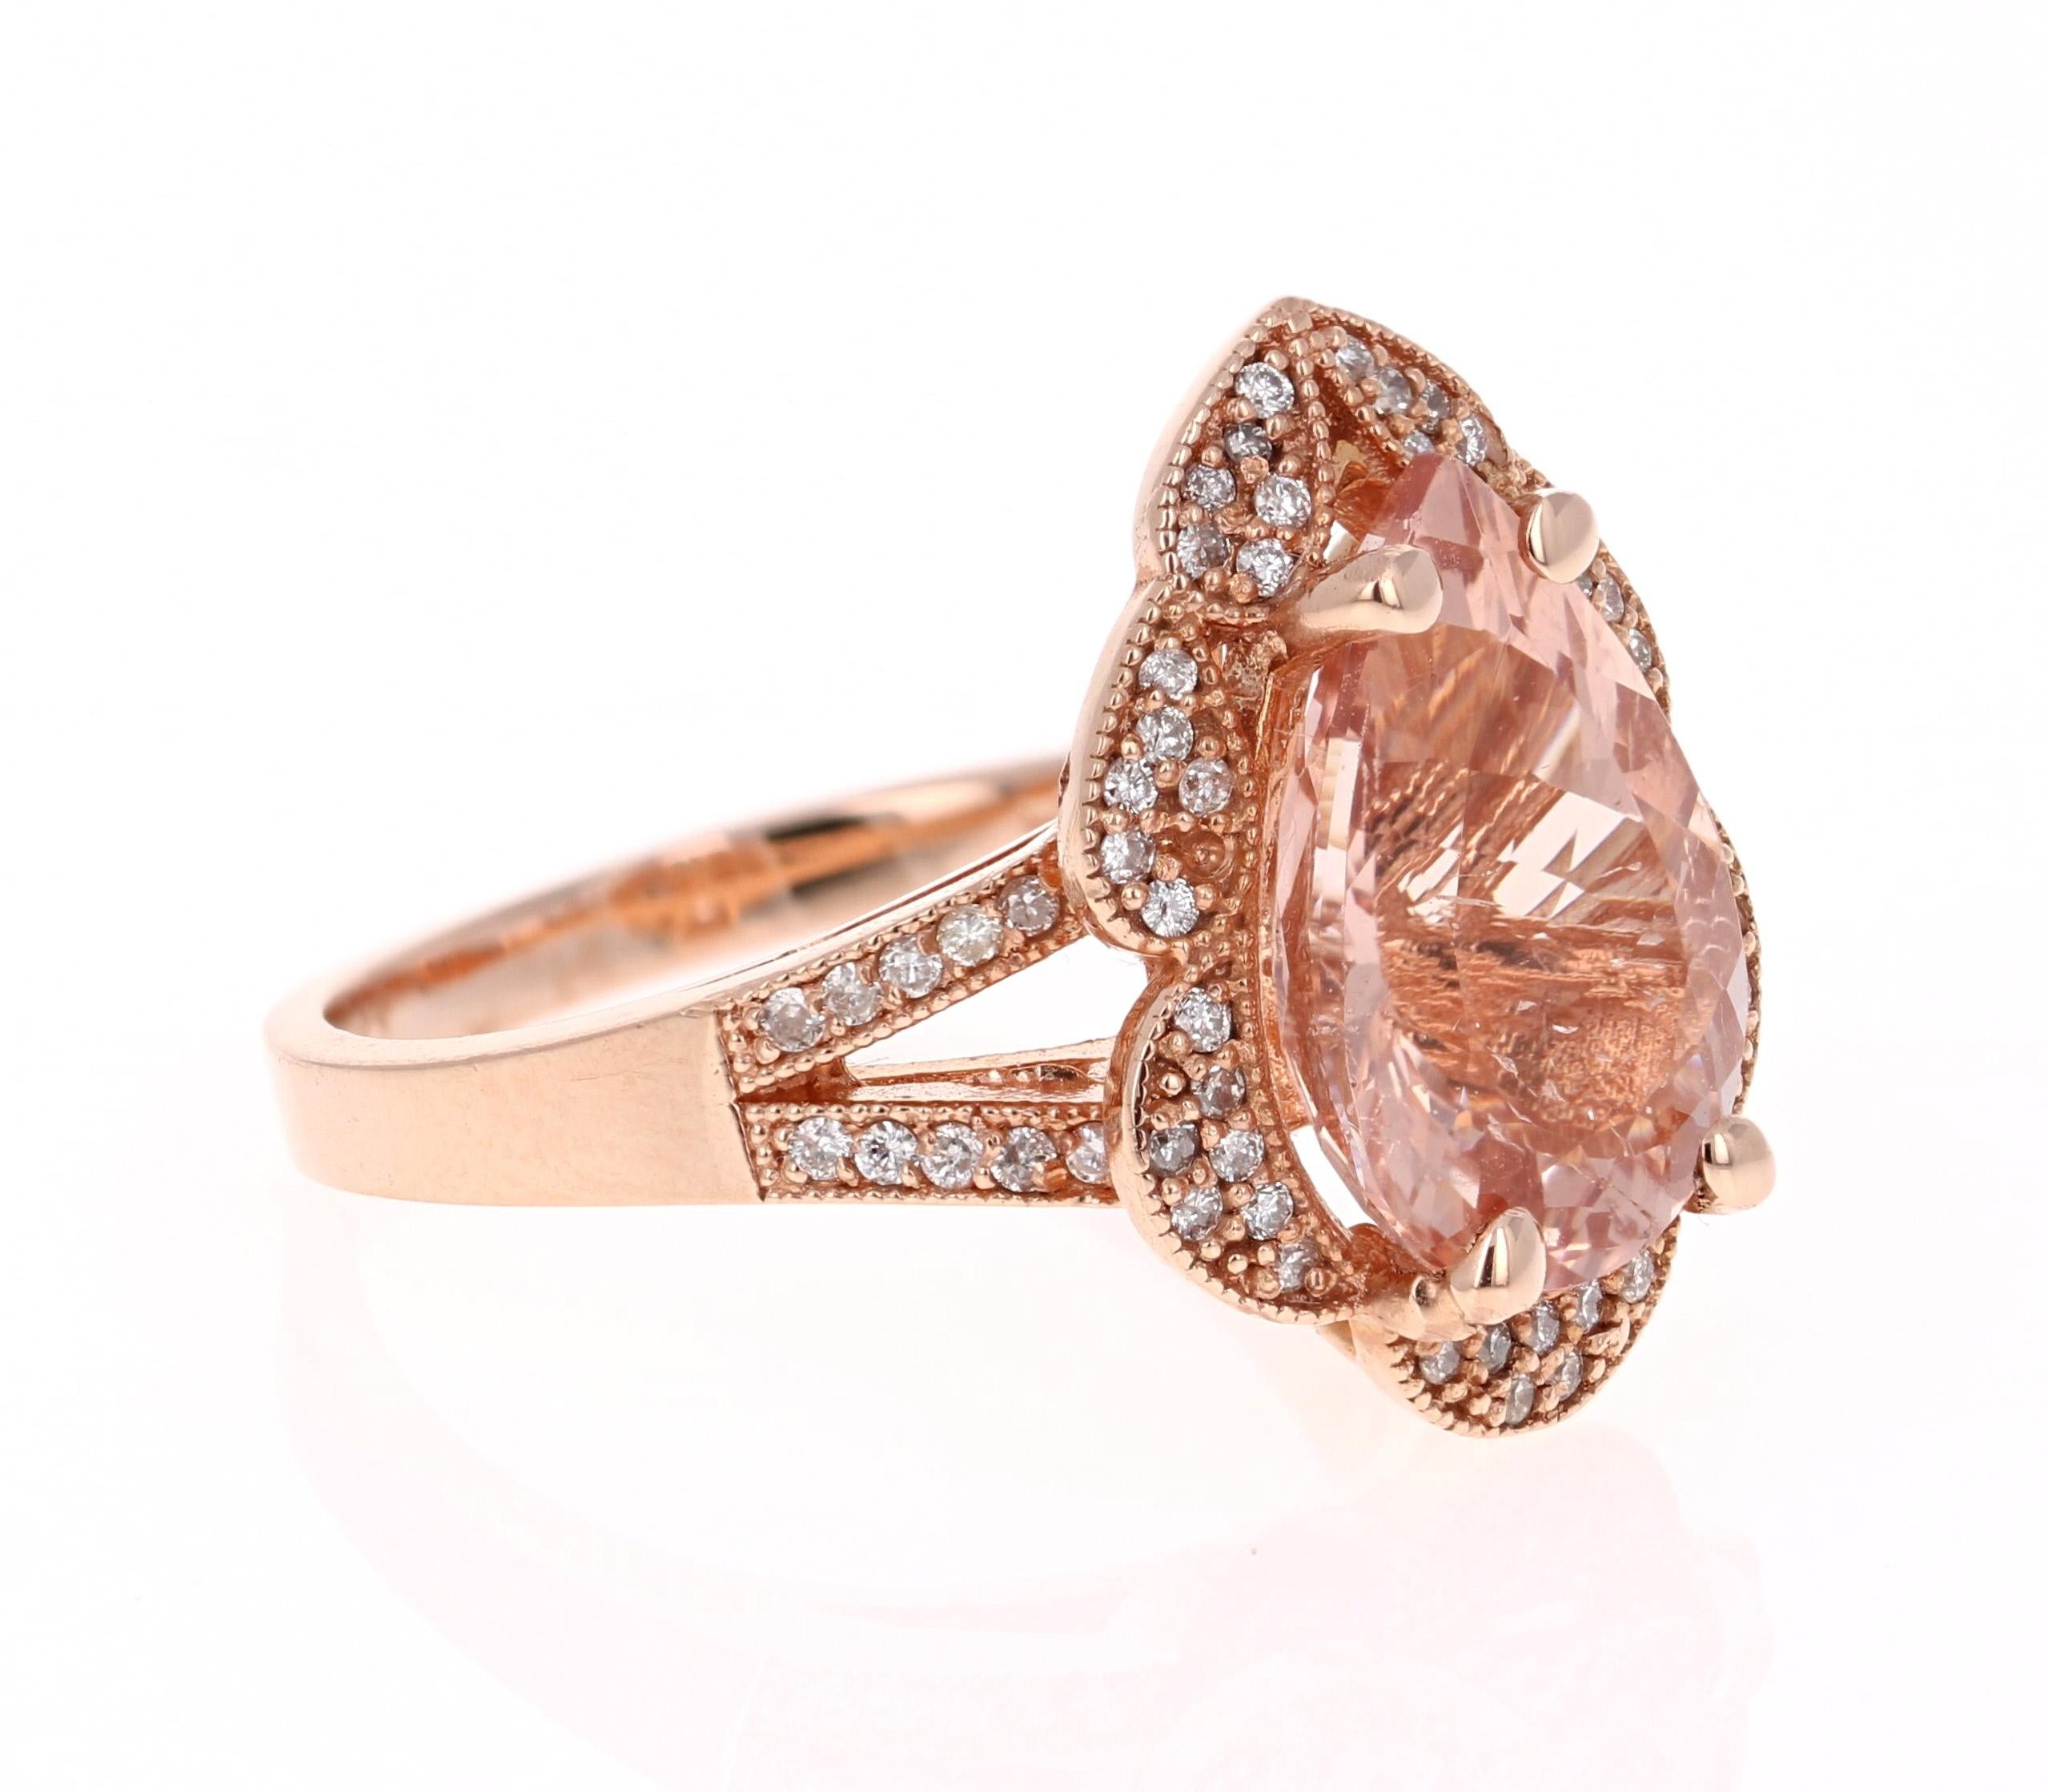 Gorgeous and Unique Morganite Diamond Ring! 

This Morganite ring has a 4.59 Carat Pear Cut Cut Morganite and is surrounded by 67 Round Cut Diamonds that weigh 0.42 Carats.  The diamonds have a clarity and color of VS-H. The total carat weight of